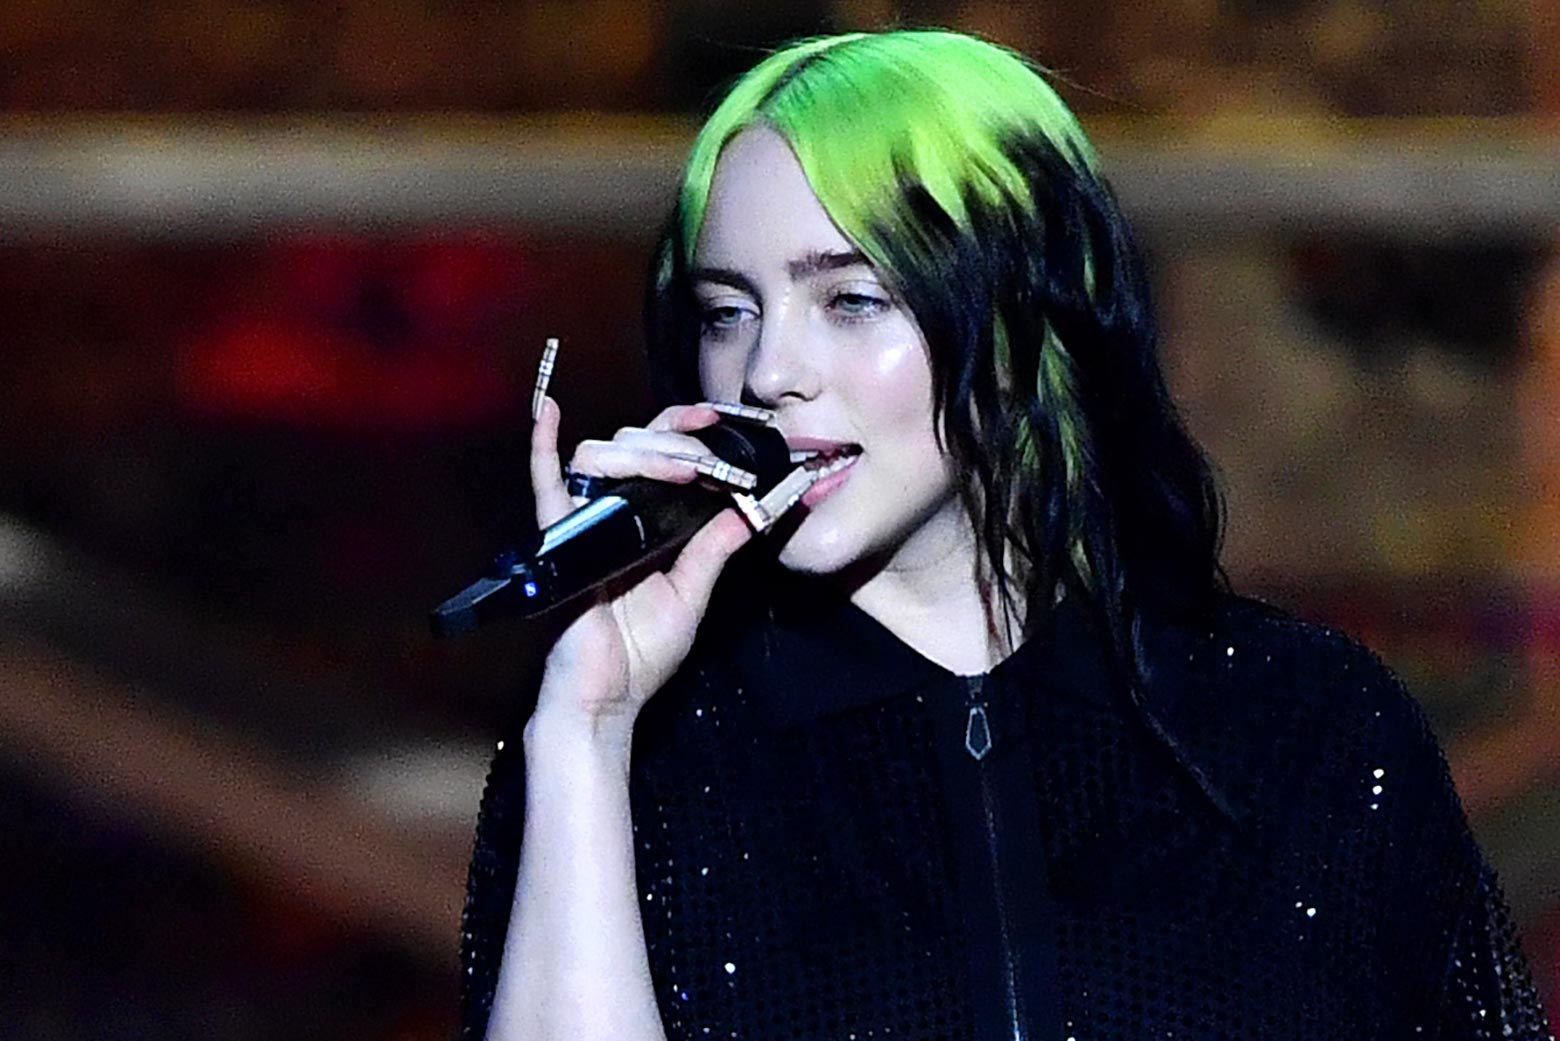 Billie Eilish Documentary The World S A Little Blurry Should We Be Worried About This Teen Pop Star